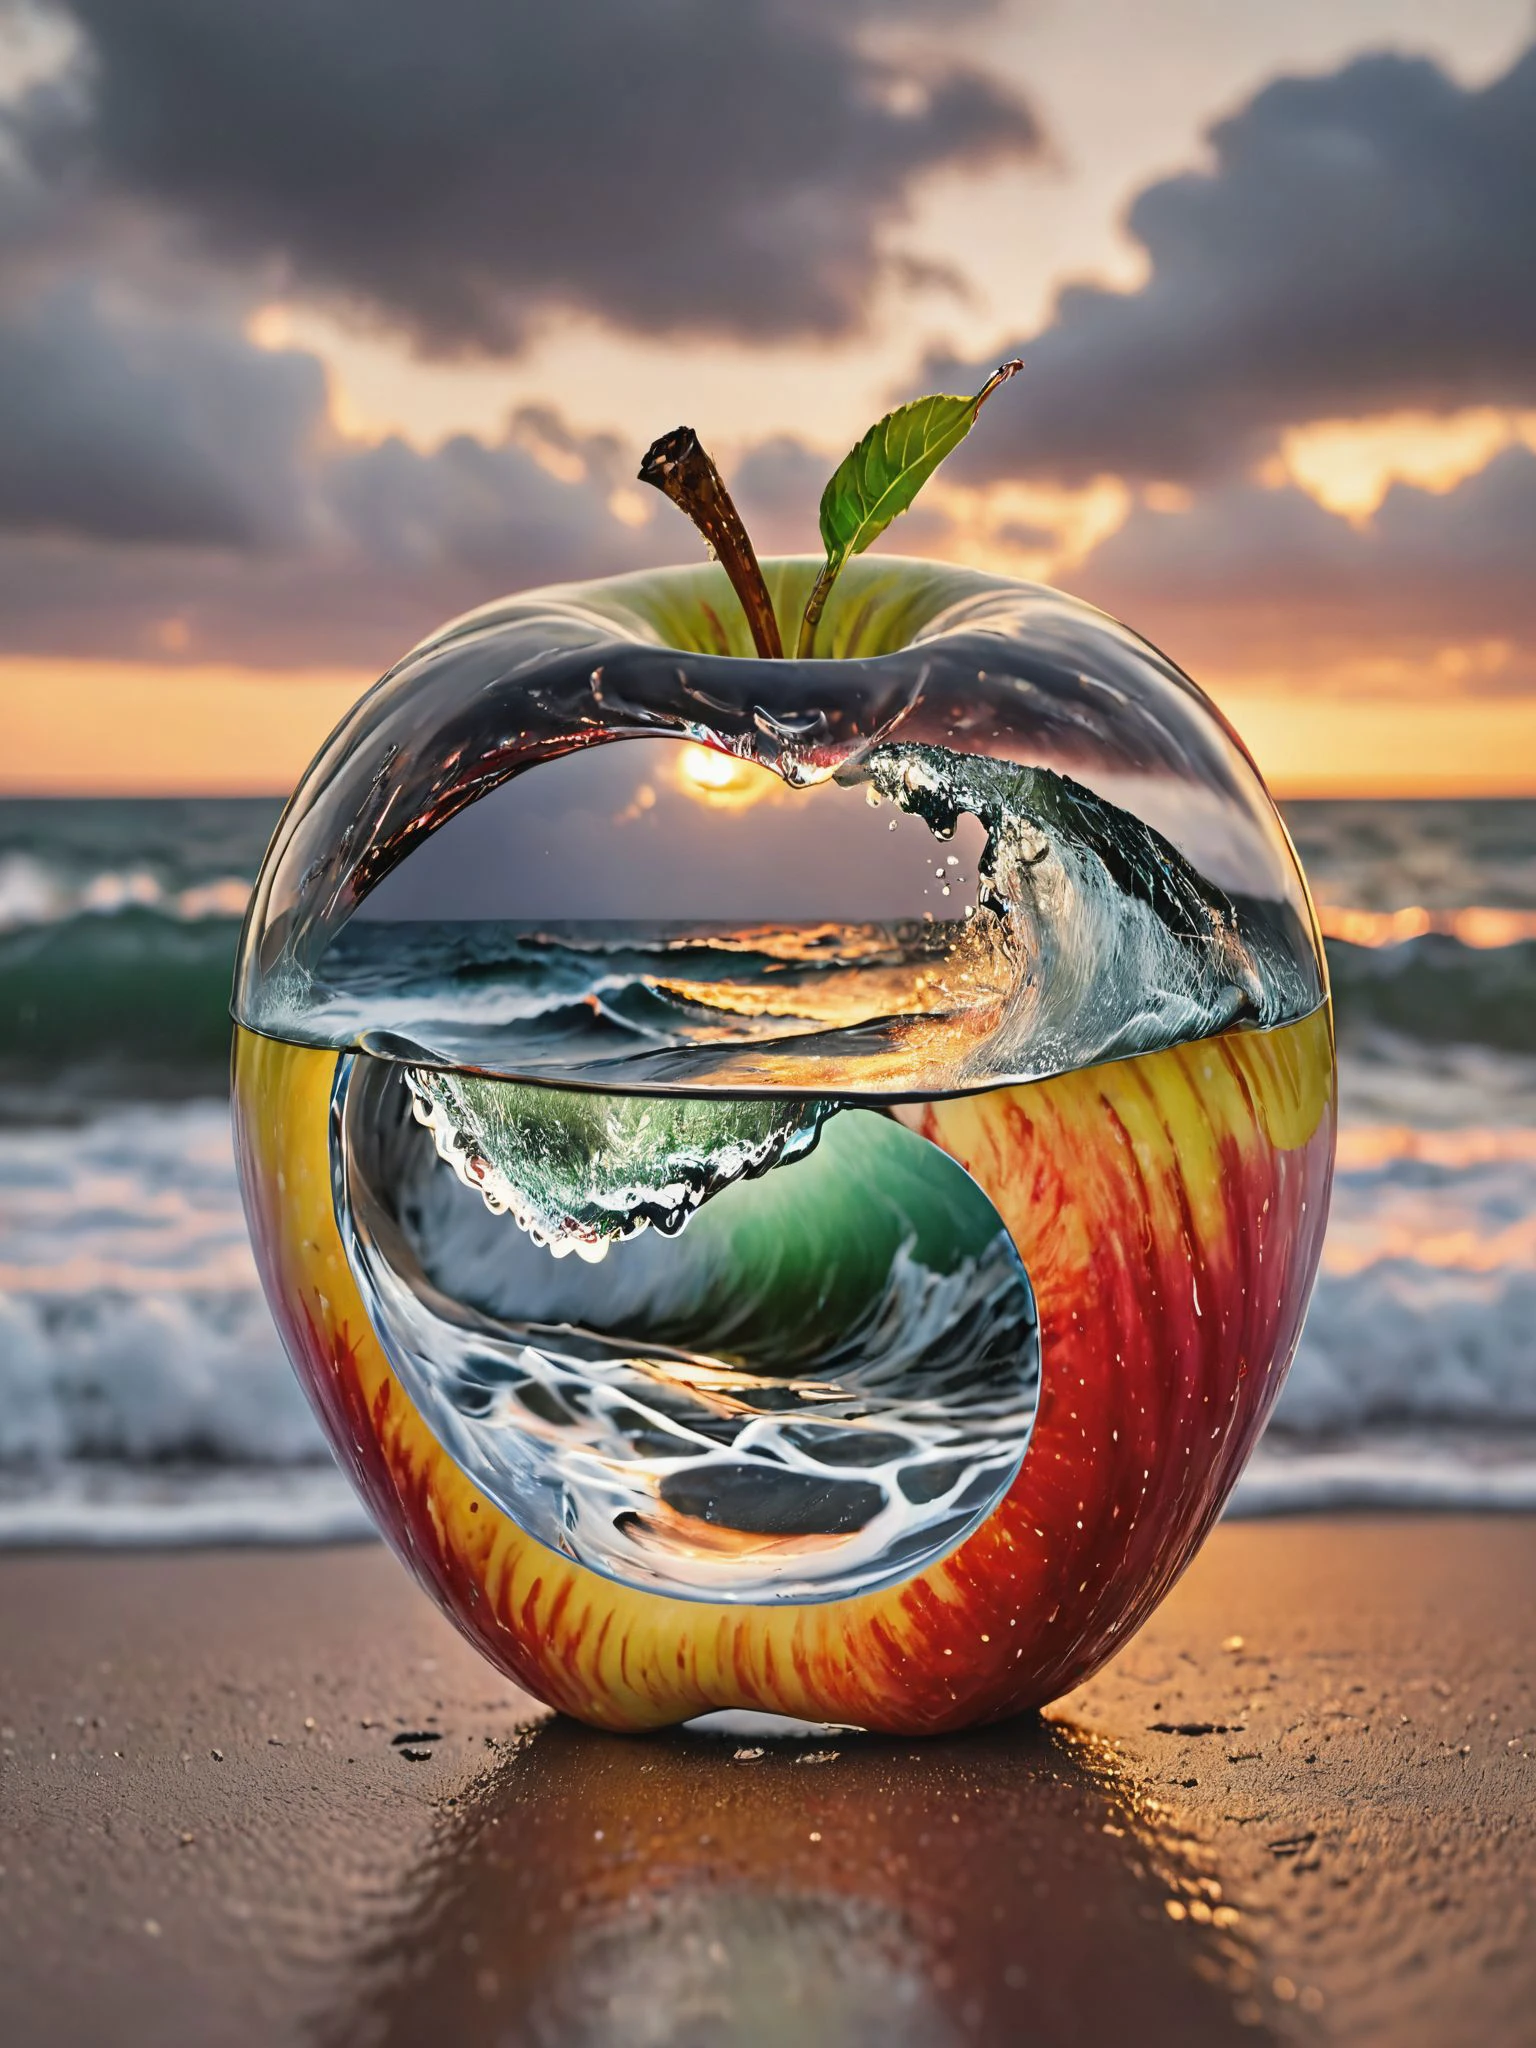 Imagine a photograph capturing an extraordinary and surreal subject: a transparent apple, crystal clear and perfectly formed, revealing a highly detailed, tumultuous miniature sea raging within. The apple sits boldly in the center of the frame, its smooth, glass-like surface reflecting light and offering a window into the dynamic scene inside. Within, the stormy sea is a marvel of miniaturization - tiny waves crest and crash with realistic ferocity, and if one looks closely, minute flashes of lightning and swirls of wind can be discerned, adding to the tempest's drama. The background of the photo is intentionally simple, perhaps a soft, neutral color or a subtle gradient, ensuring that all attention is drawn to the striking contrast between the serene exterior of the apple and the wild, chaotic seascape it contains. The lighting is key, illuminating the apple in a way that highlights the intricate details of the storm inside while maintaining the overall clarity and impact of the image. (extremely detailed, realistic, perfect lighting, vibrant colors,intricate details),((freckles:0.3),high detailed skin:1.3), best quality, masterpiece, highres, absurdres, incredibly absurdres, huge filesize, wallpaper, colorful,8K,RAW photo 